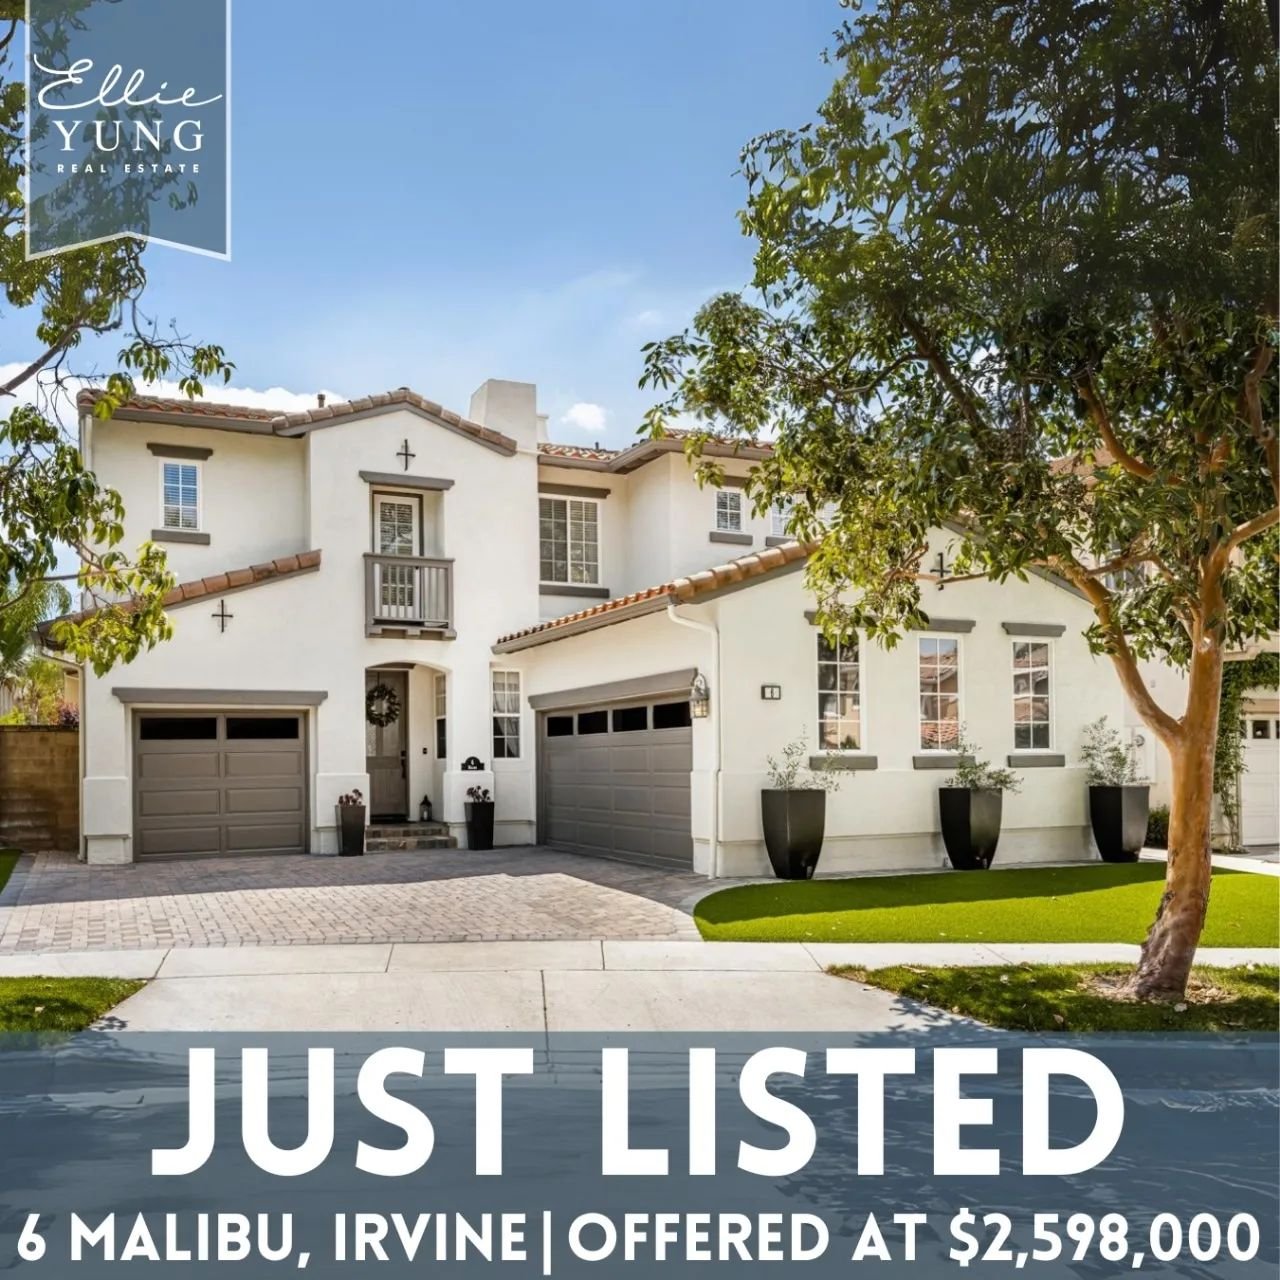 🔔 Just Listed - 6 Malibu 🏡!

Welcome to this stunning home in the highly sought-after 24-hr GUARD GATED community of Northpark! 

Located near the end of a quiet cul-de-sac, this impressive home features:

🏠 5 Bedrooms + Loft
🛌 Main Floor Bedroom